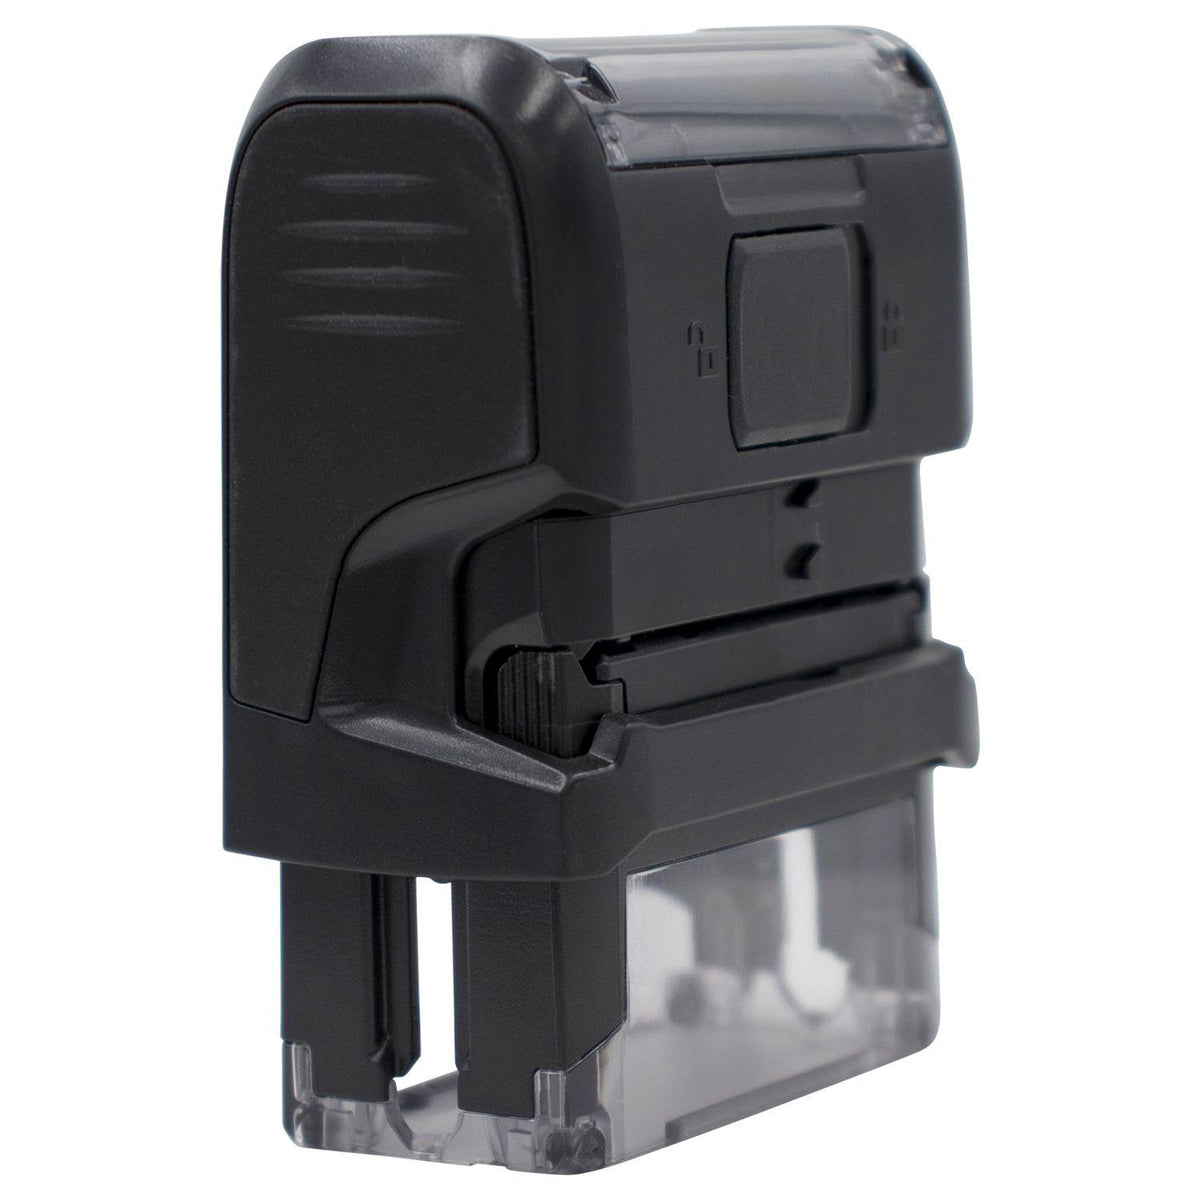 Large Self-Inking Bold FYI Stamp Back View